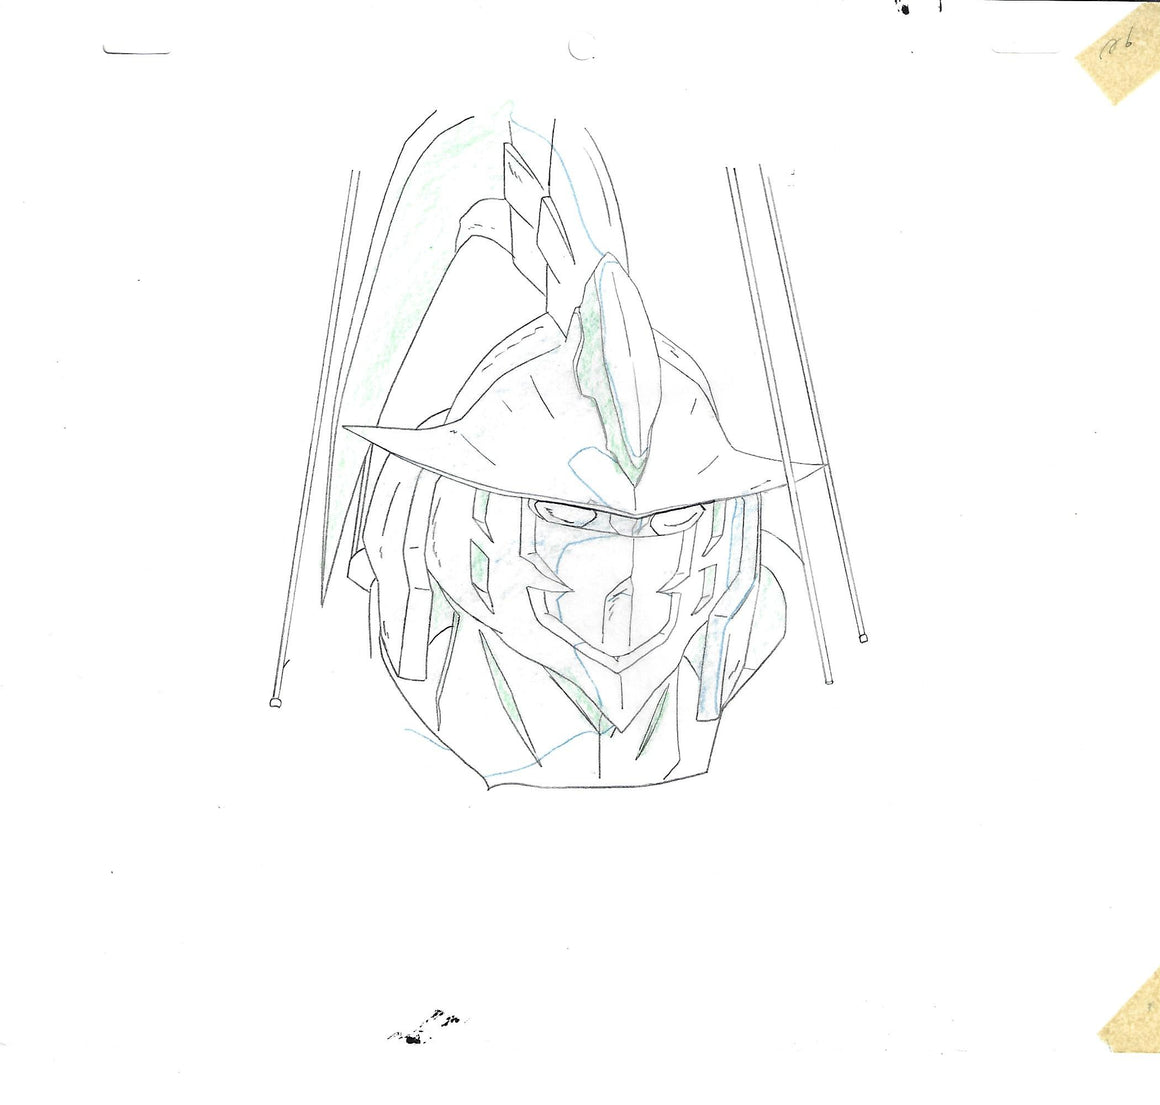 Cybuster - Cybuster being reeled up - 1-layer Production Cel w/ Douga Pencil Sketch